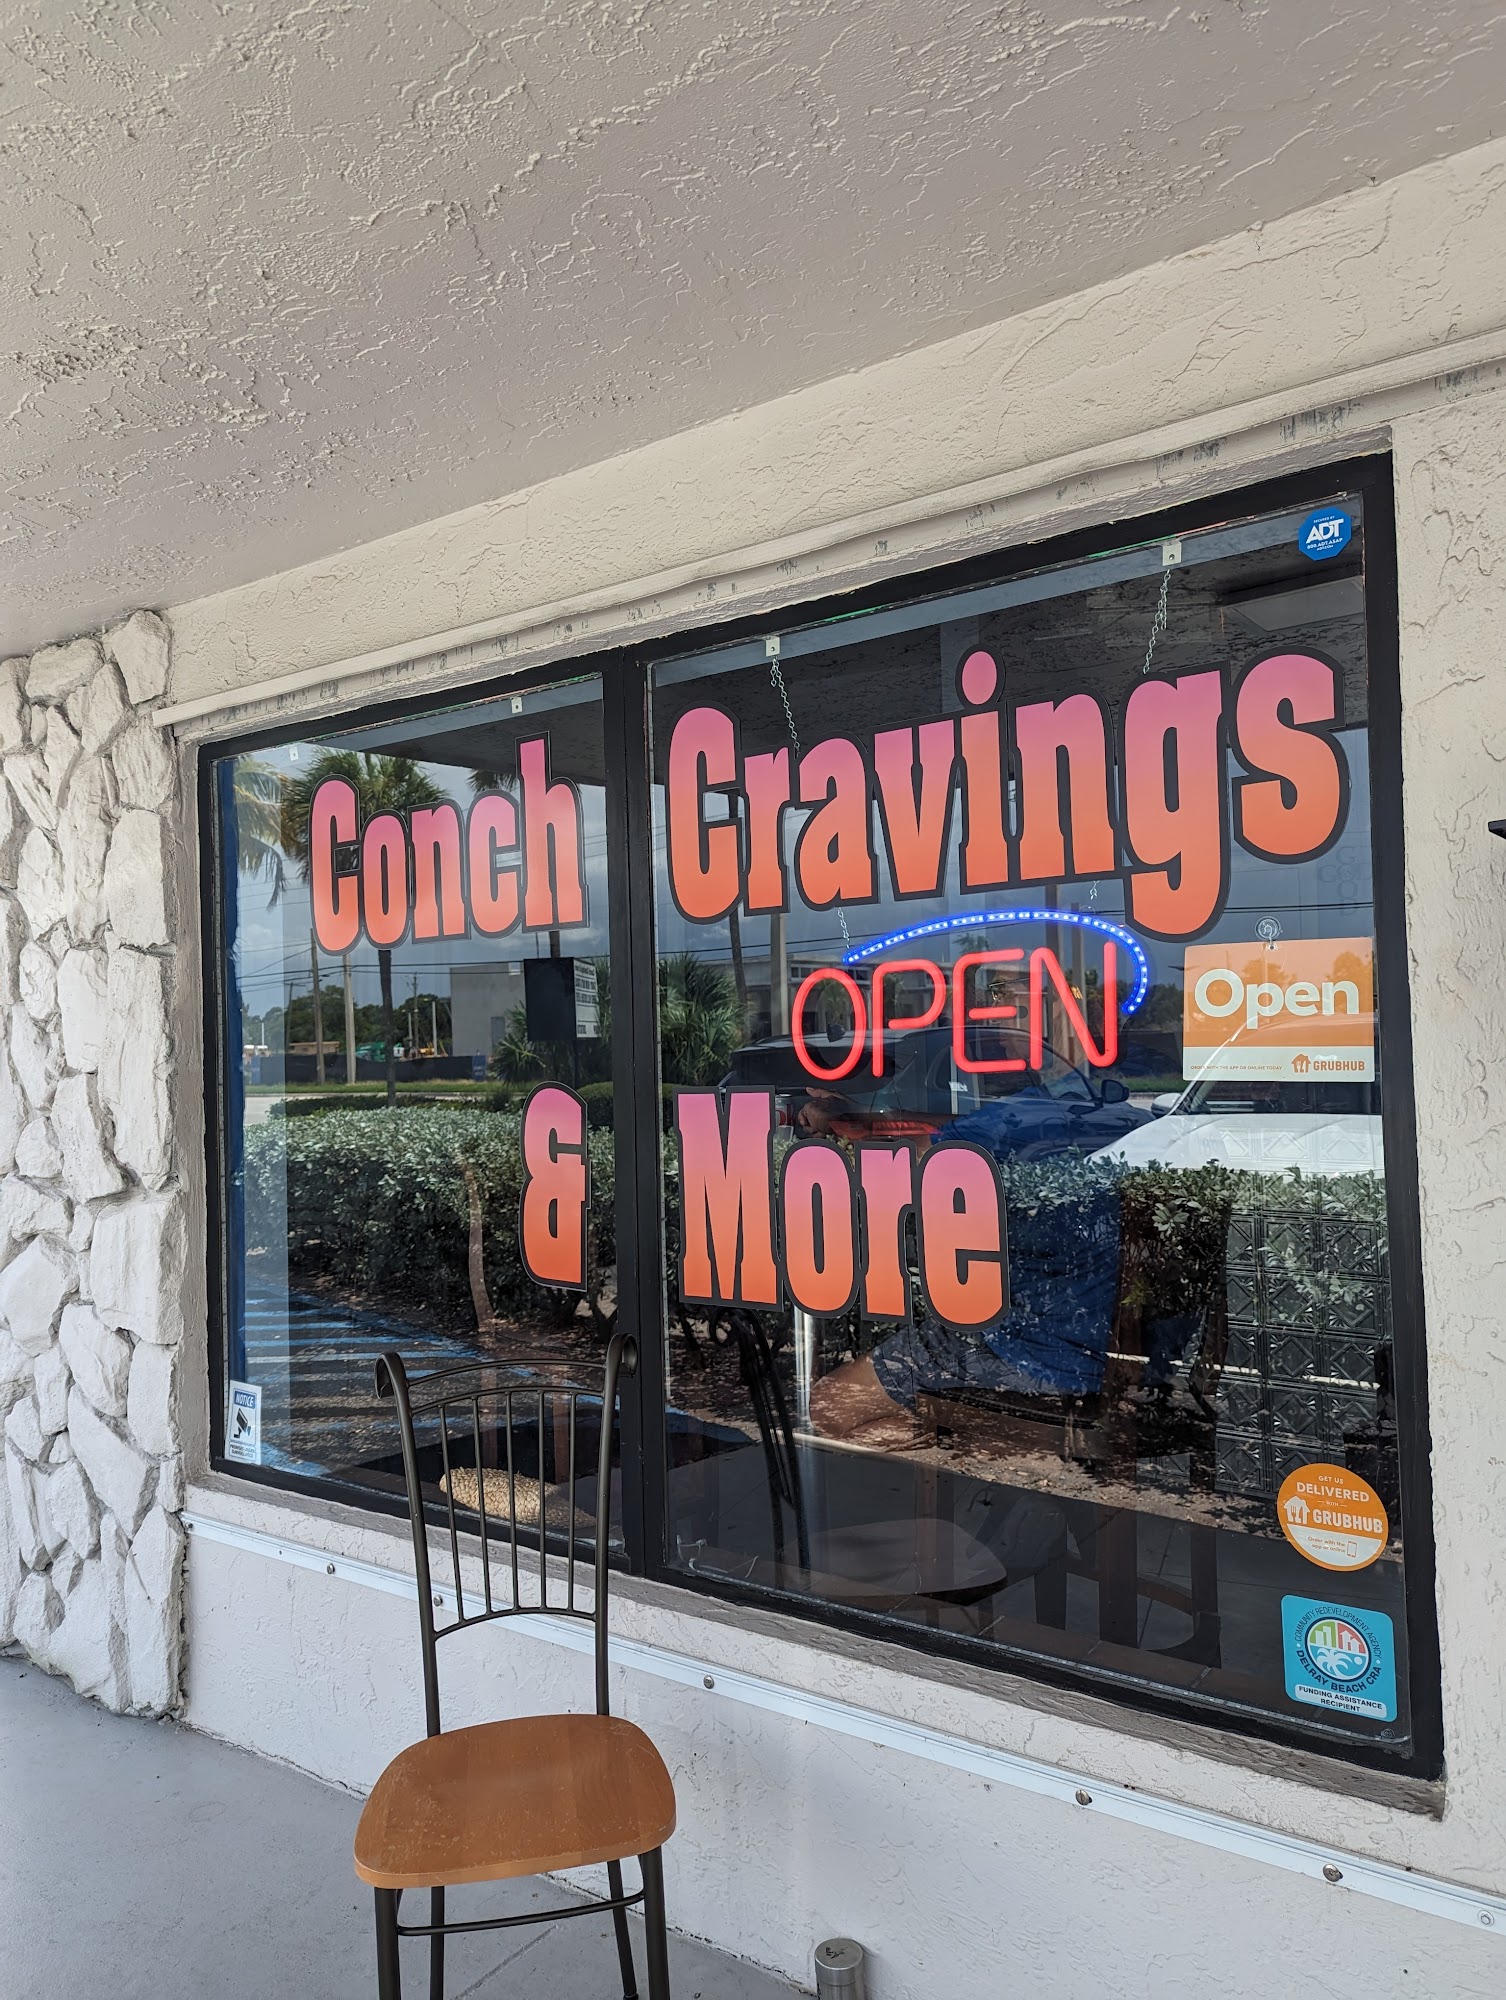 Conch Cravings & More